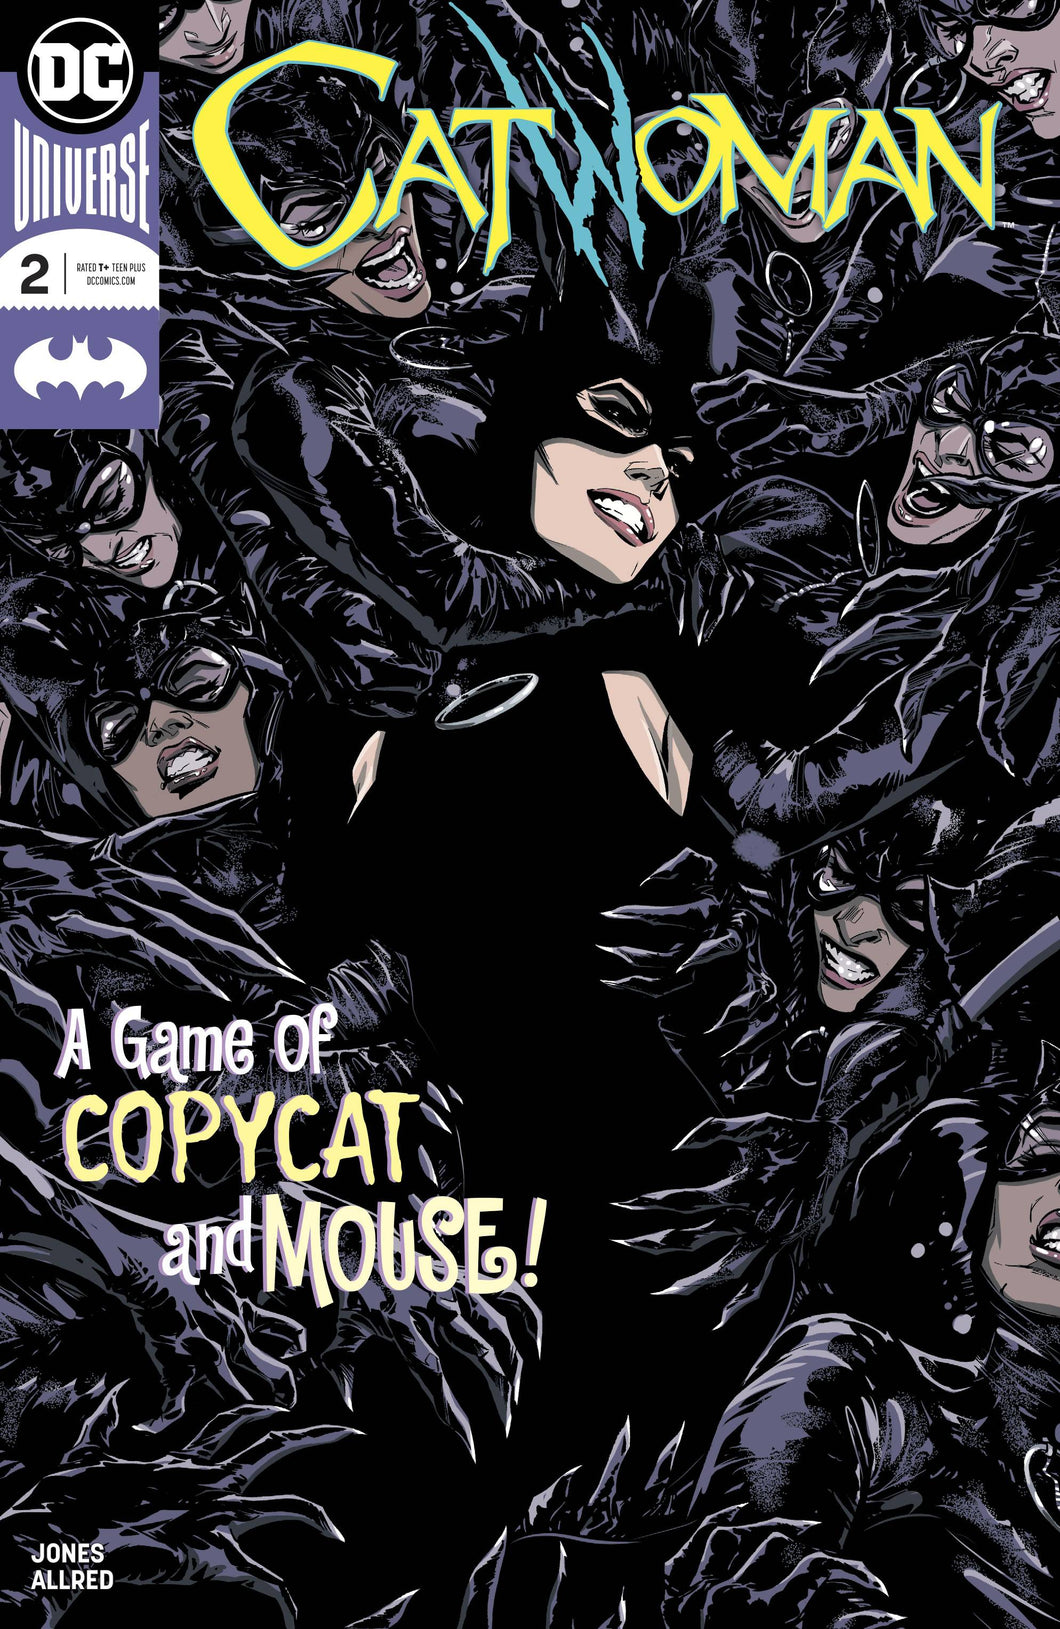 CATWOMAN #2 (08/08/2018)